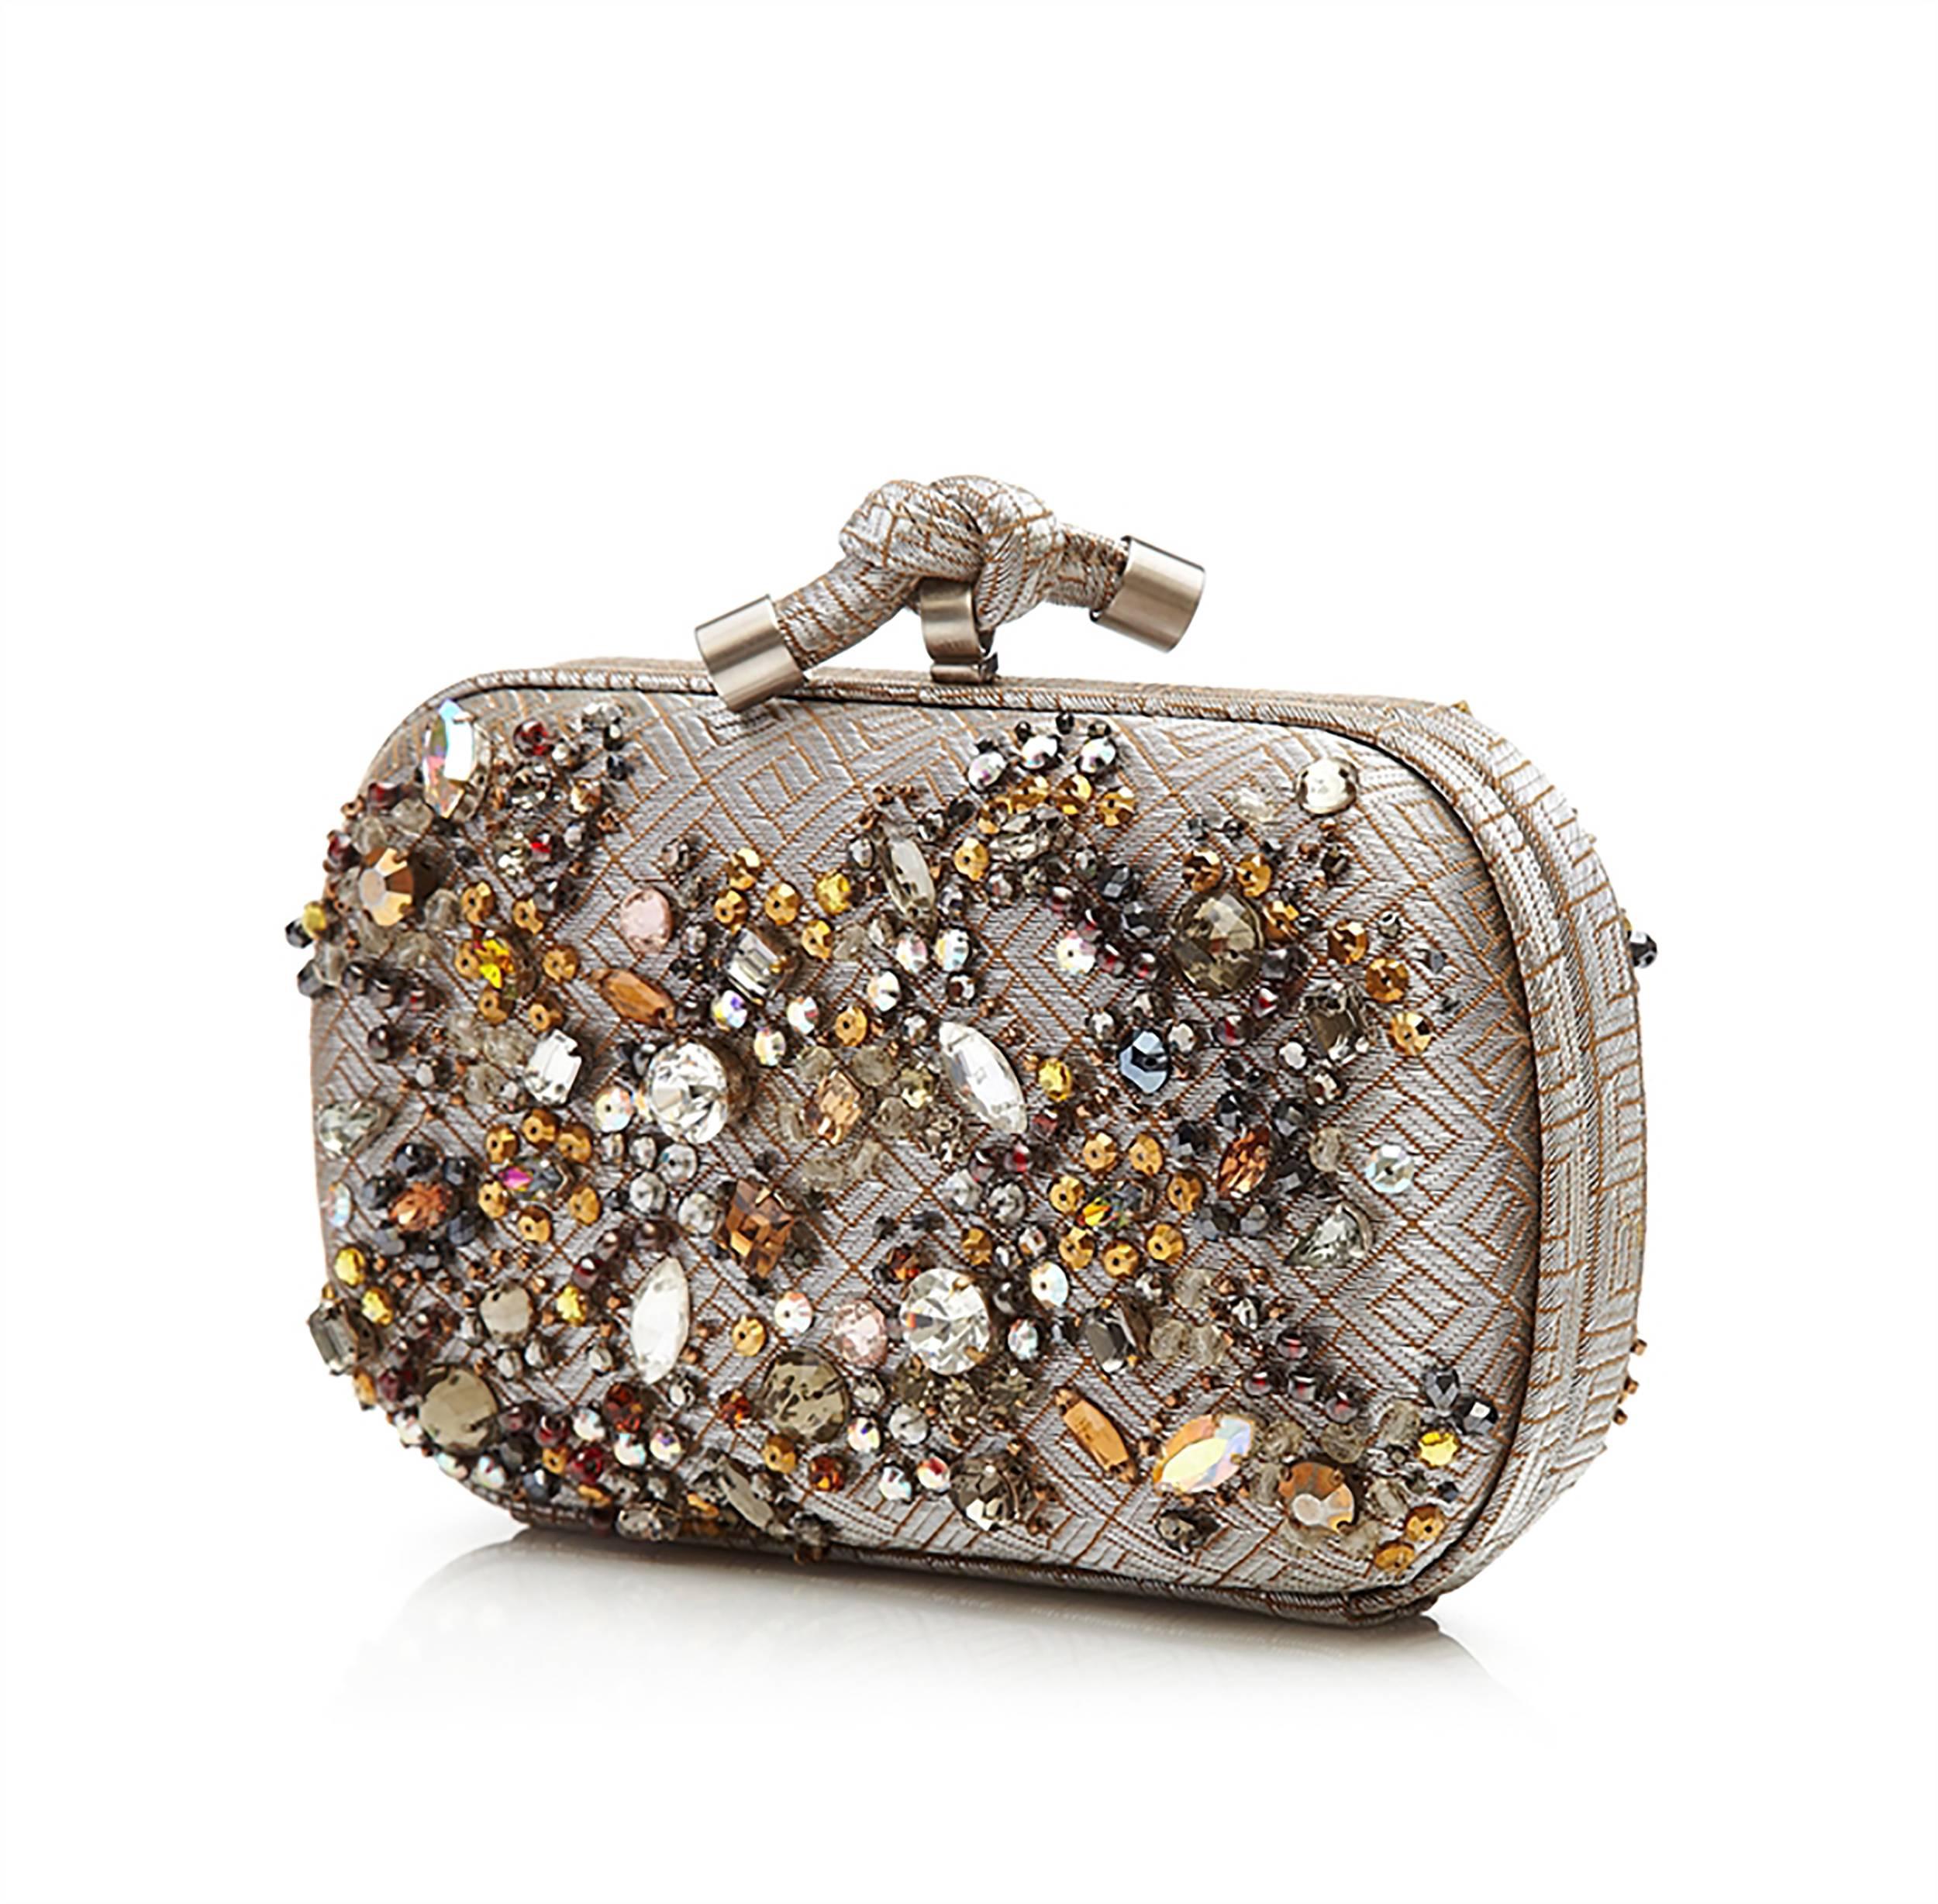 A highly rare and limited edition version of Bottega Veneta's Knot clutch bag. Finished to glittering perfection, its hard-shell exterior features a subtly patterned lurex fabric hand embroidered with heaps of sparkling crystals. It opens with